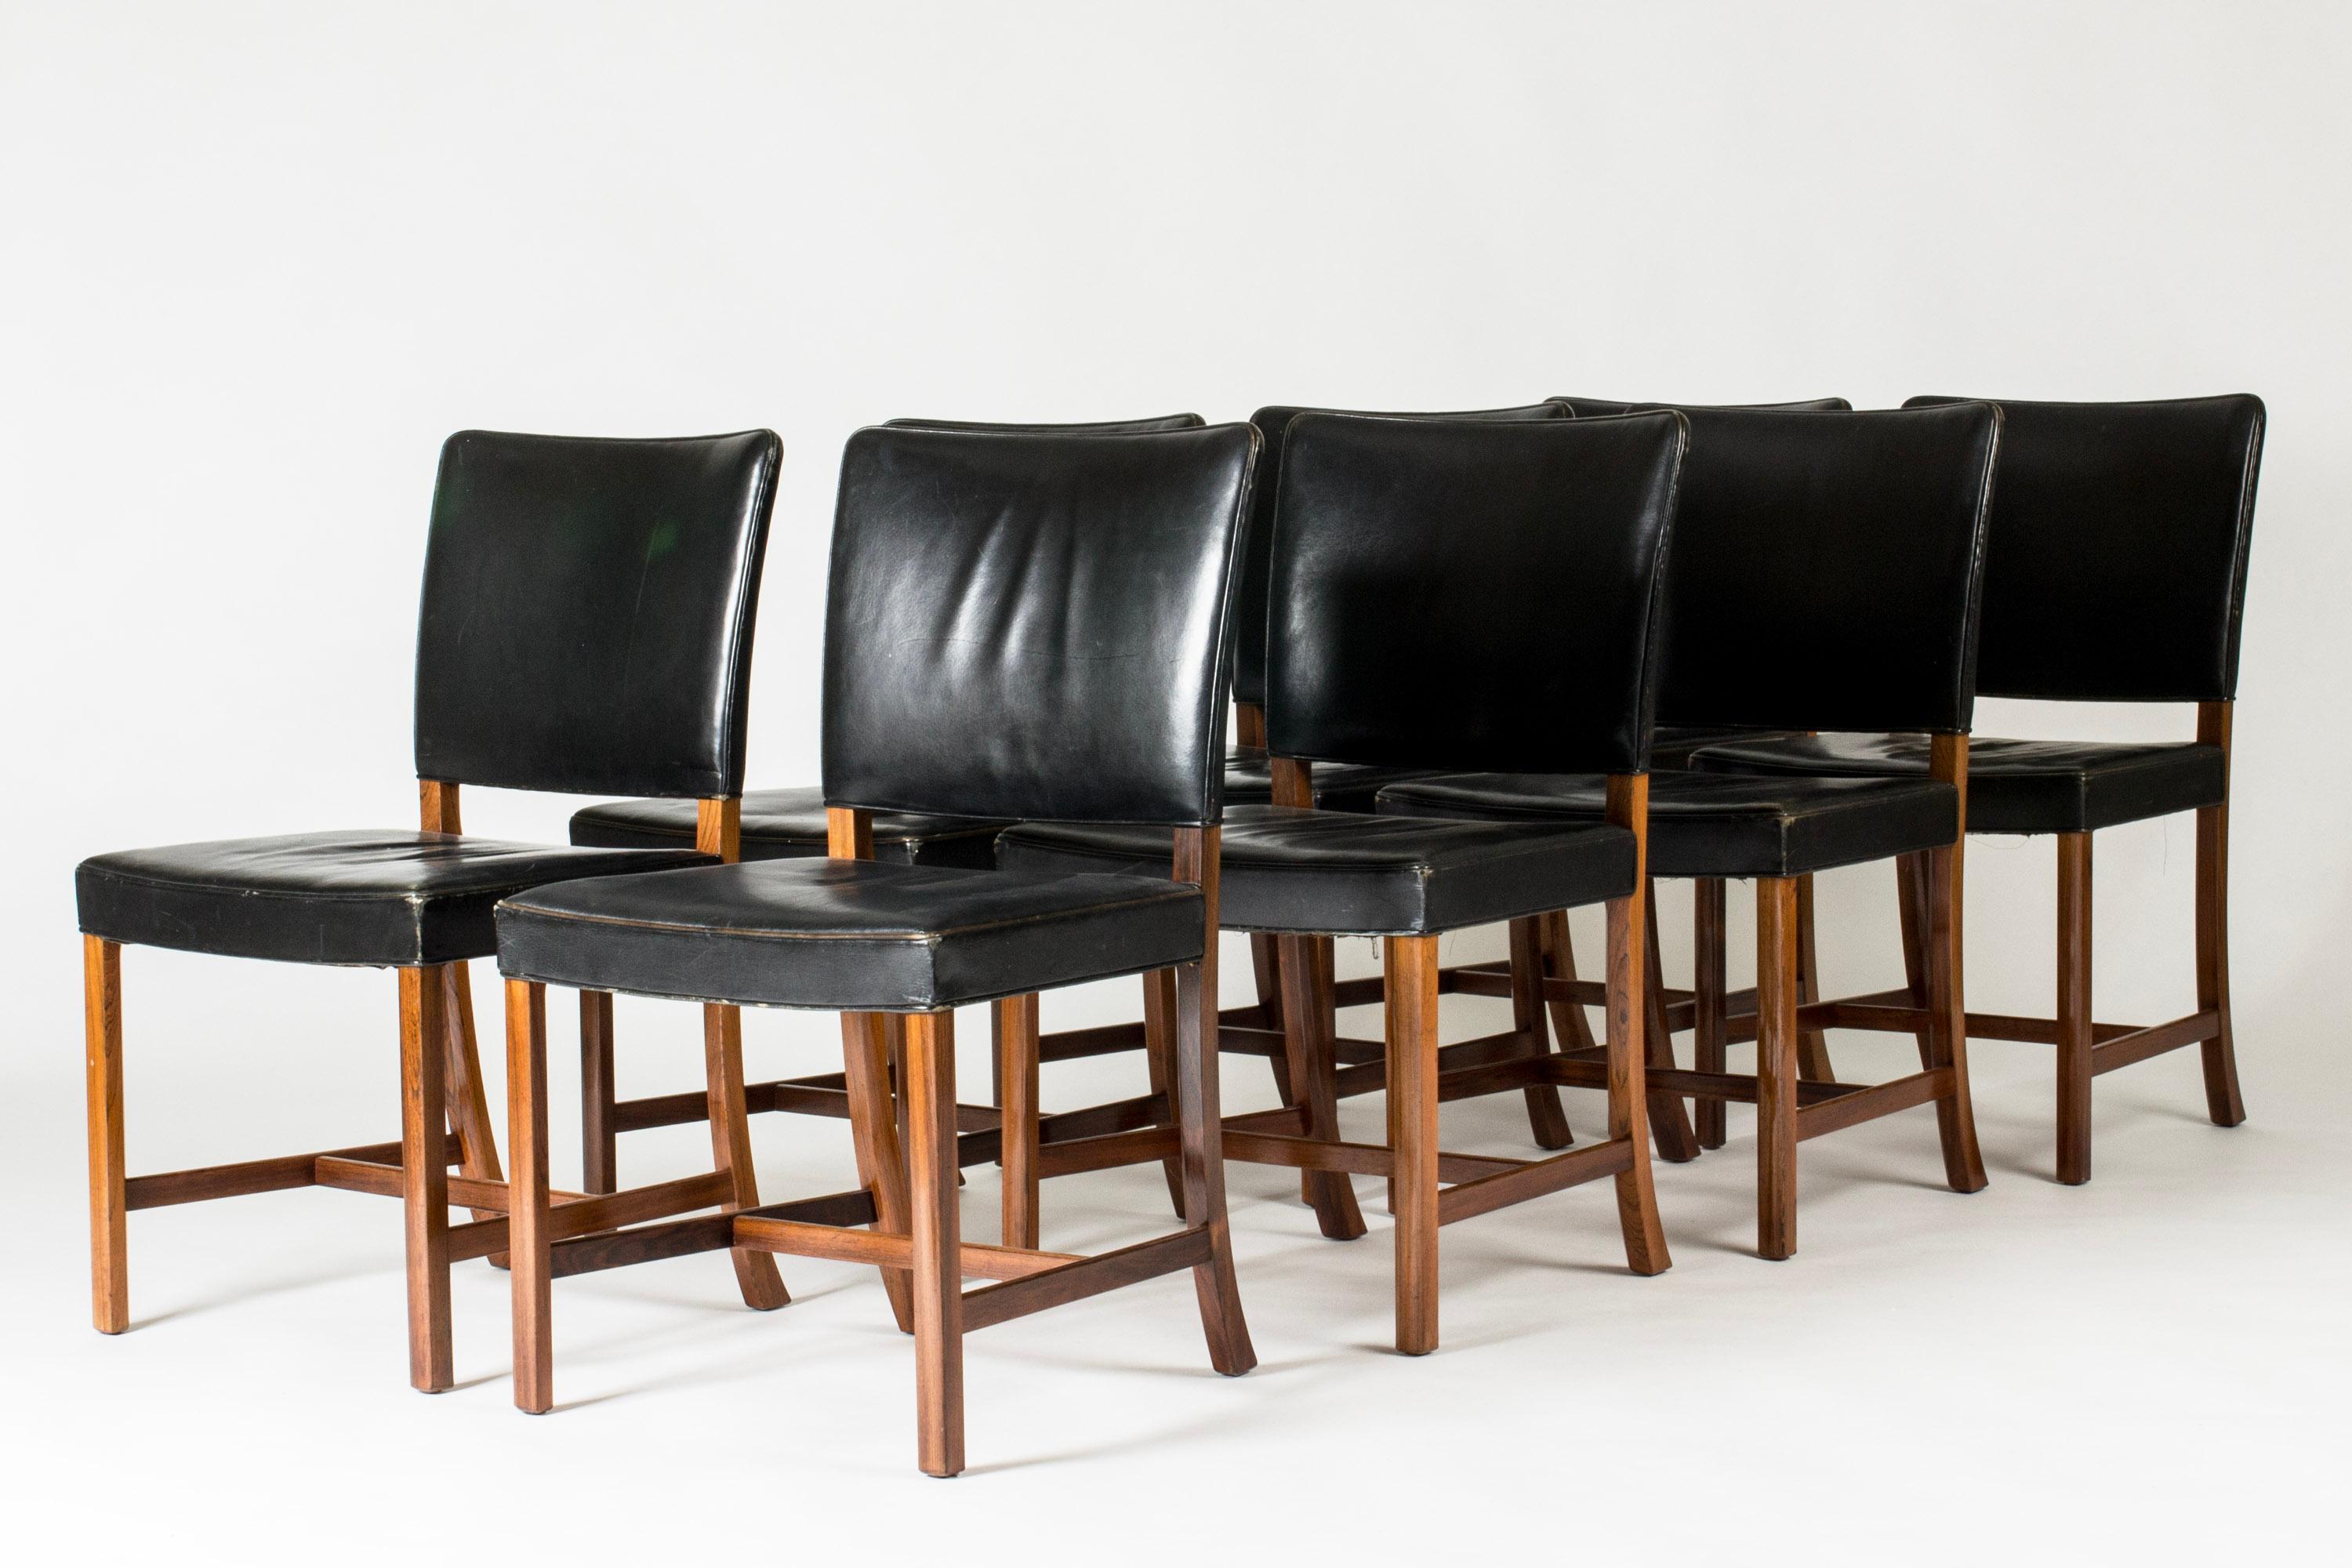 Set of eight elegant dining chairs by Ole Wanscher, made from rosewood with black leather seats and backs. Clean lines, high comfort.